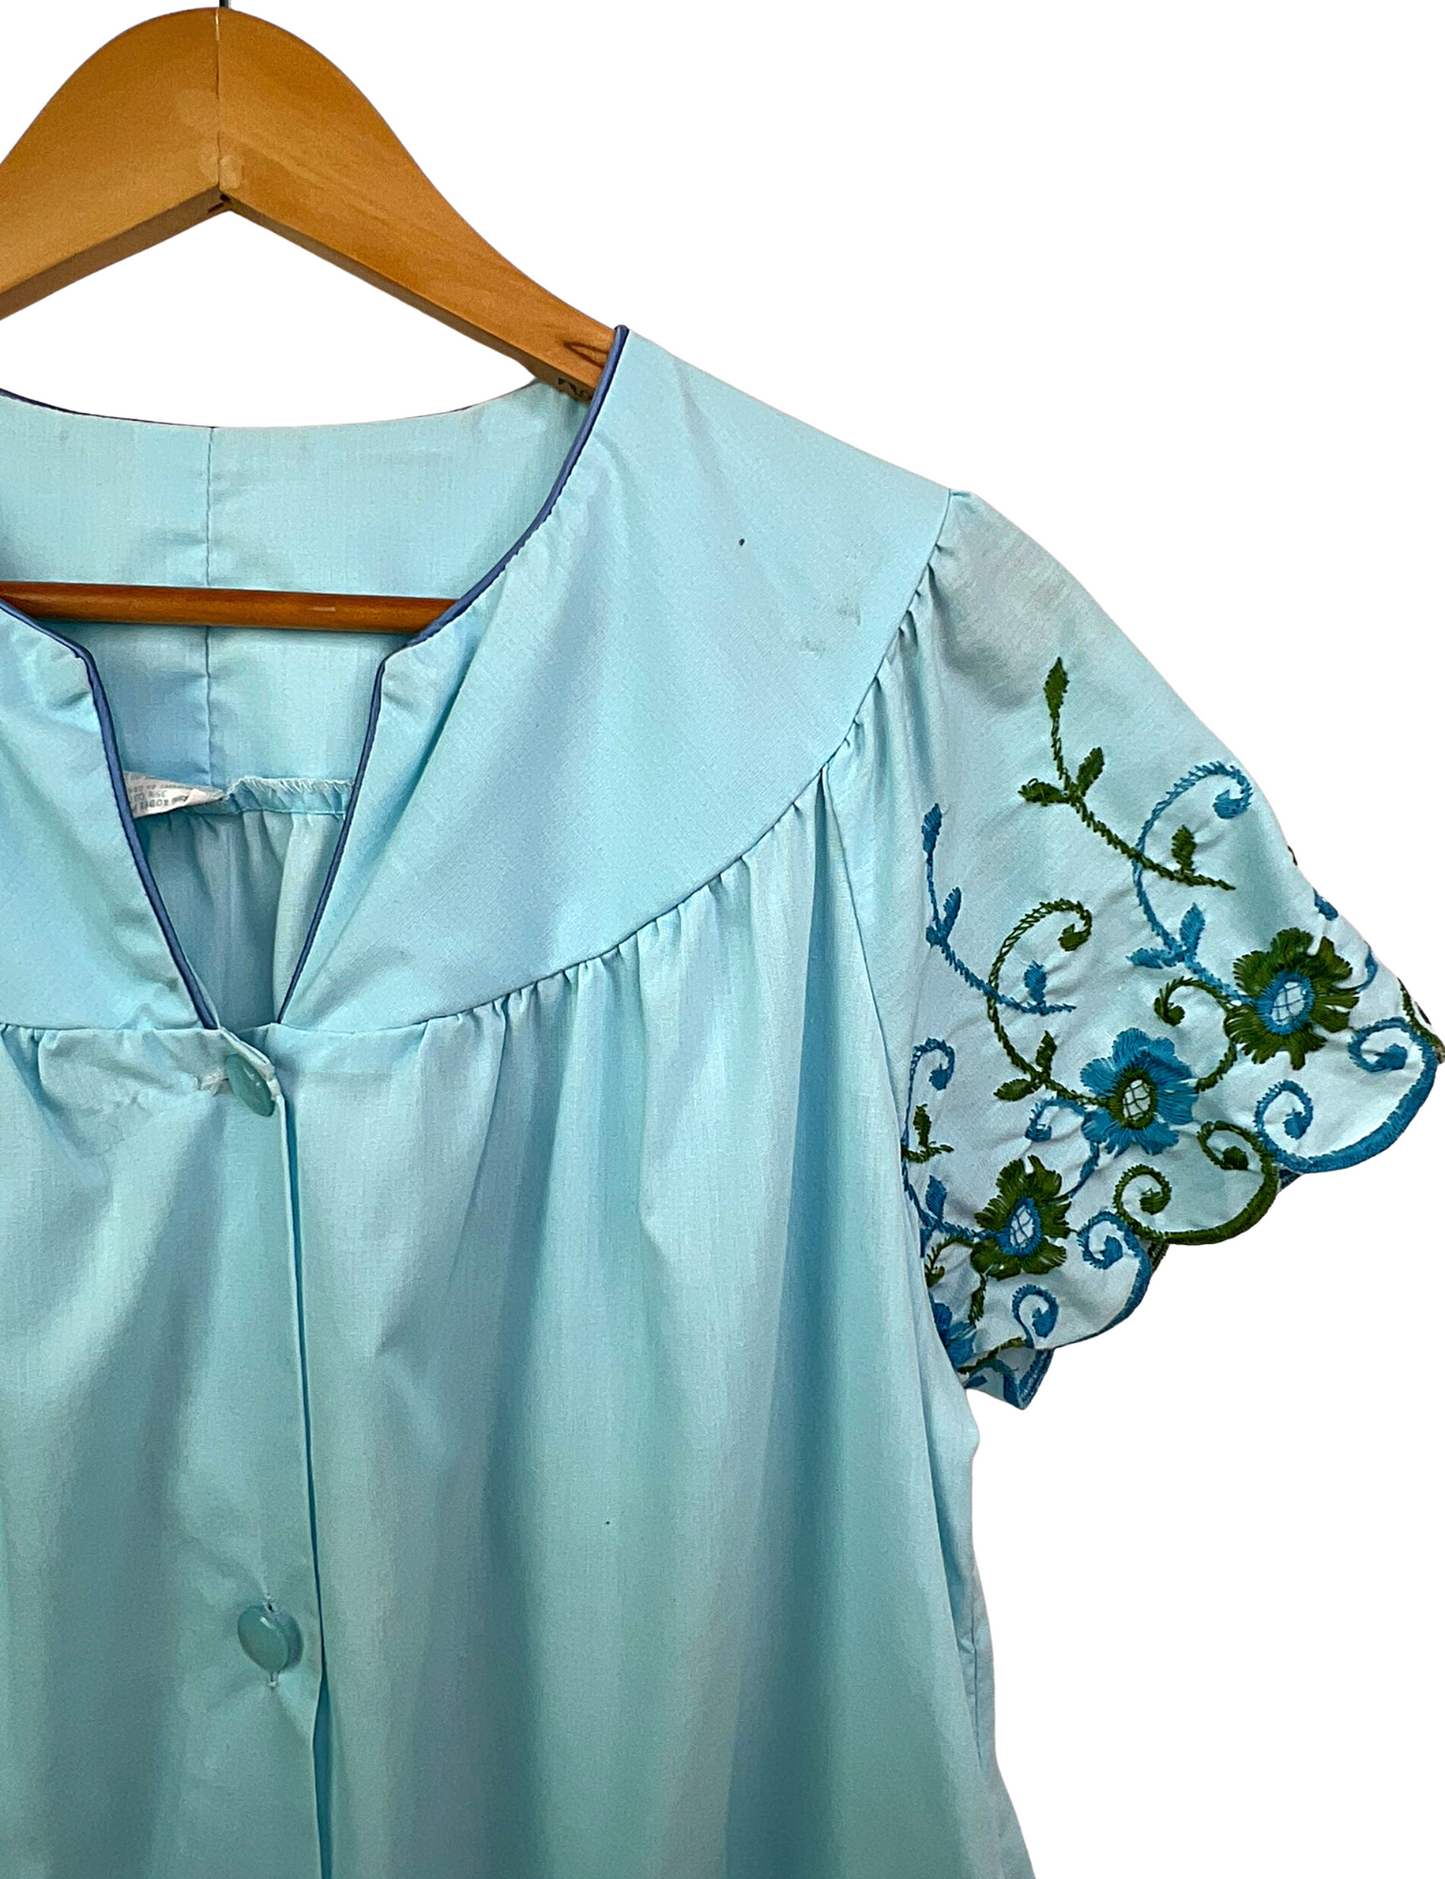 60’s Baby Blue Embroidered Floral Housecoat Robe with Pockets Size 14